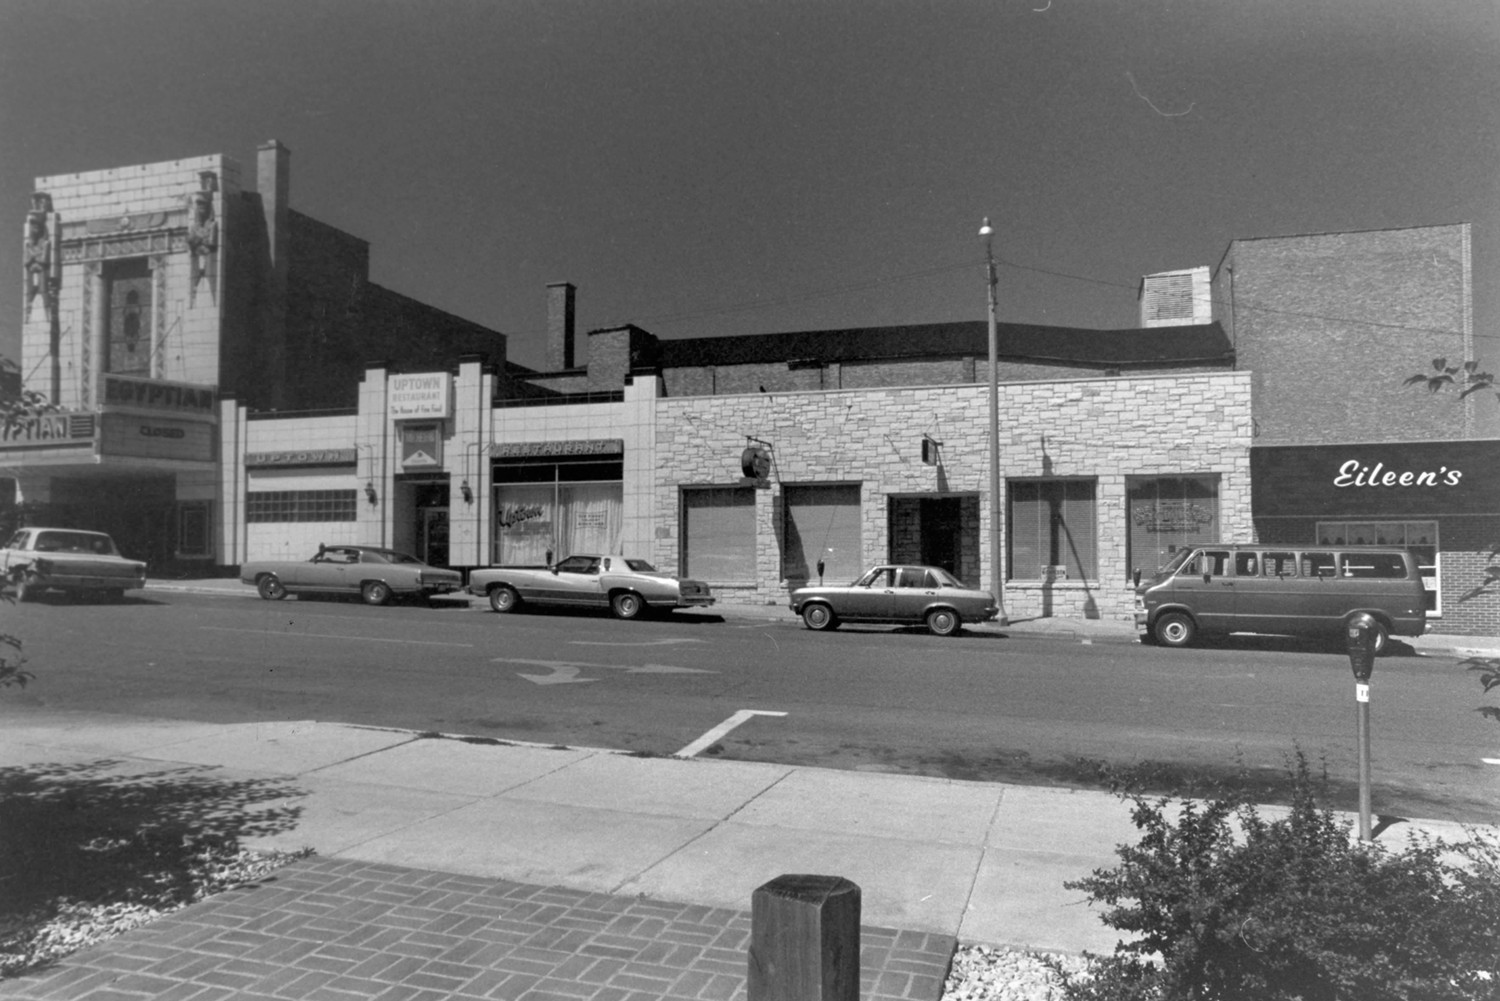 Egyptian Theatre, DeKalb Illinois L-shaped structure extends behind shops on Second Street. Original plan for shops and hotel to be built to complete the block had to be abandoned in 1929. (1978)